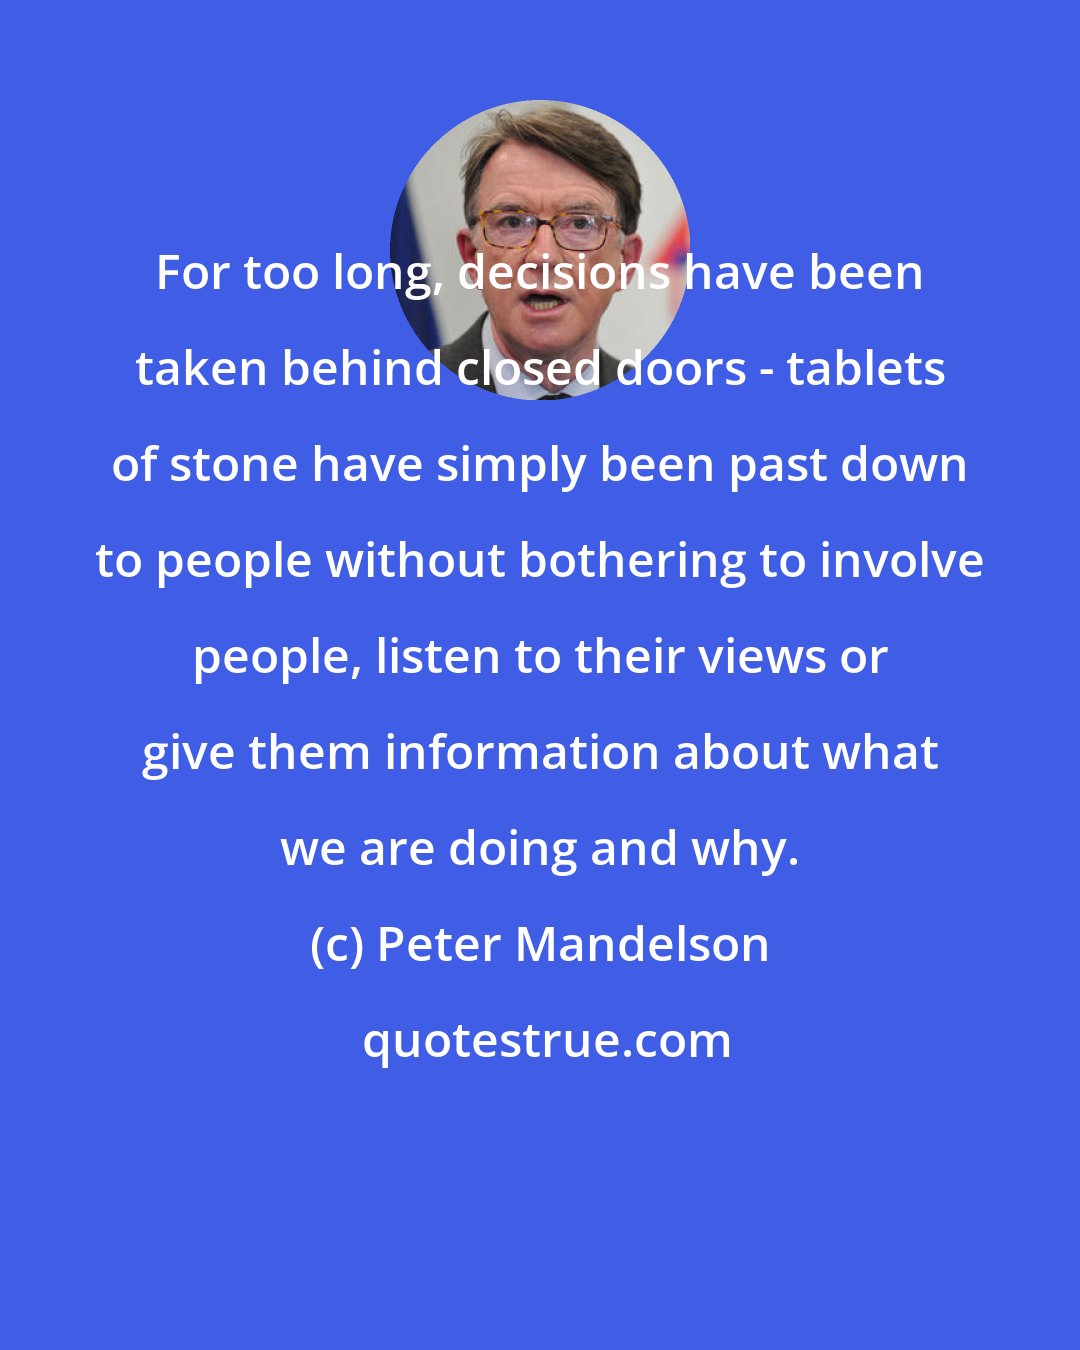 Peter Mandelson: For too long, decisions have been taken behind closed doors - tablets of stone have simply been past down to people without bothering to involve people, listen to their views or give them information about what we are doing and why.